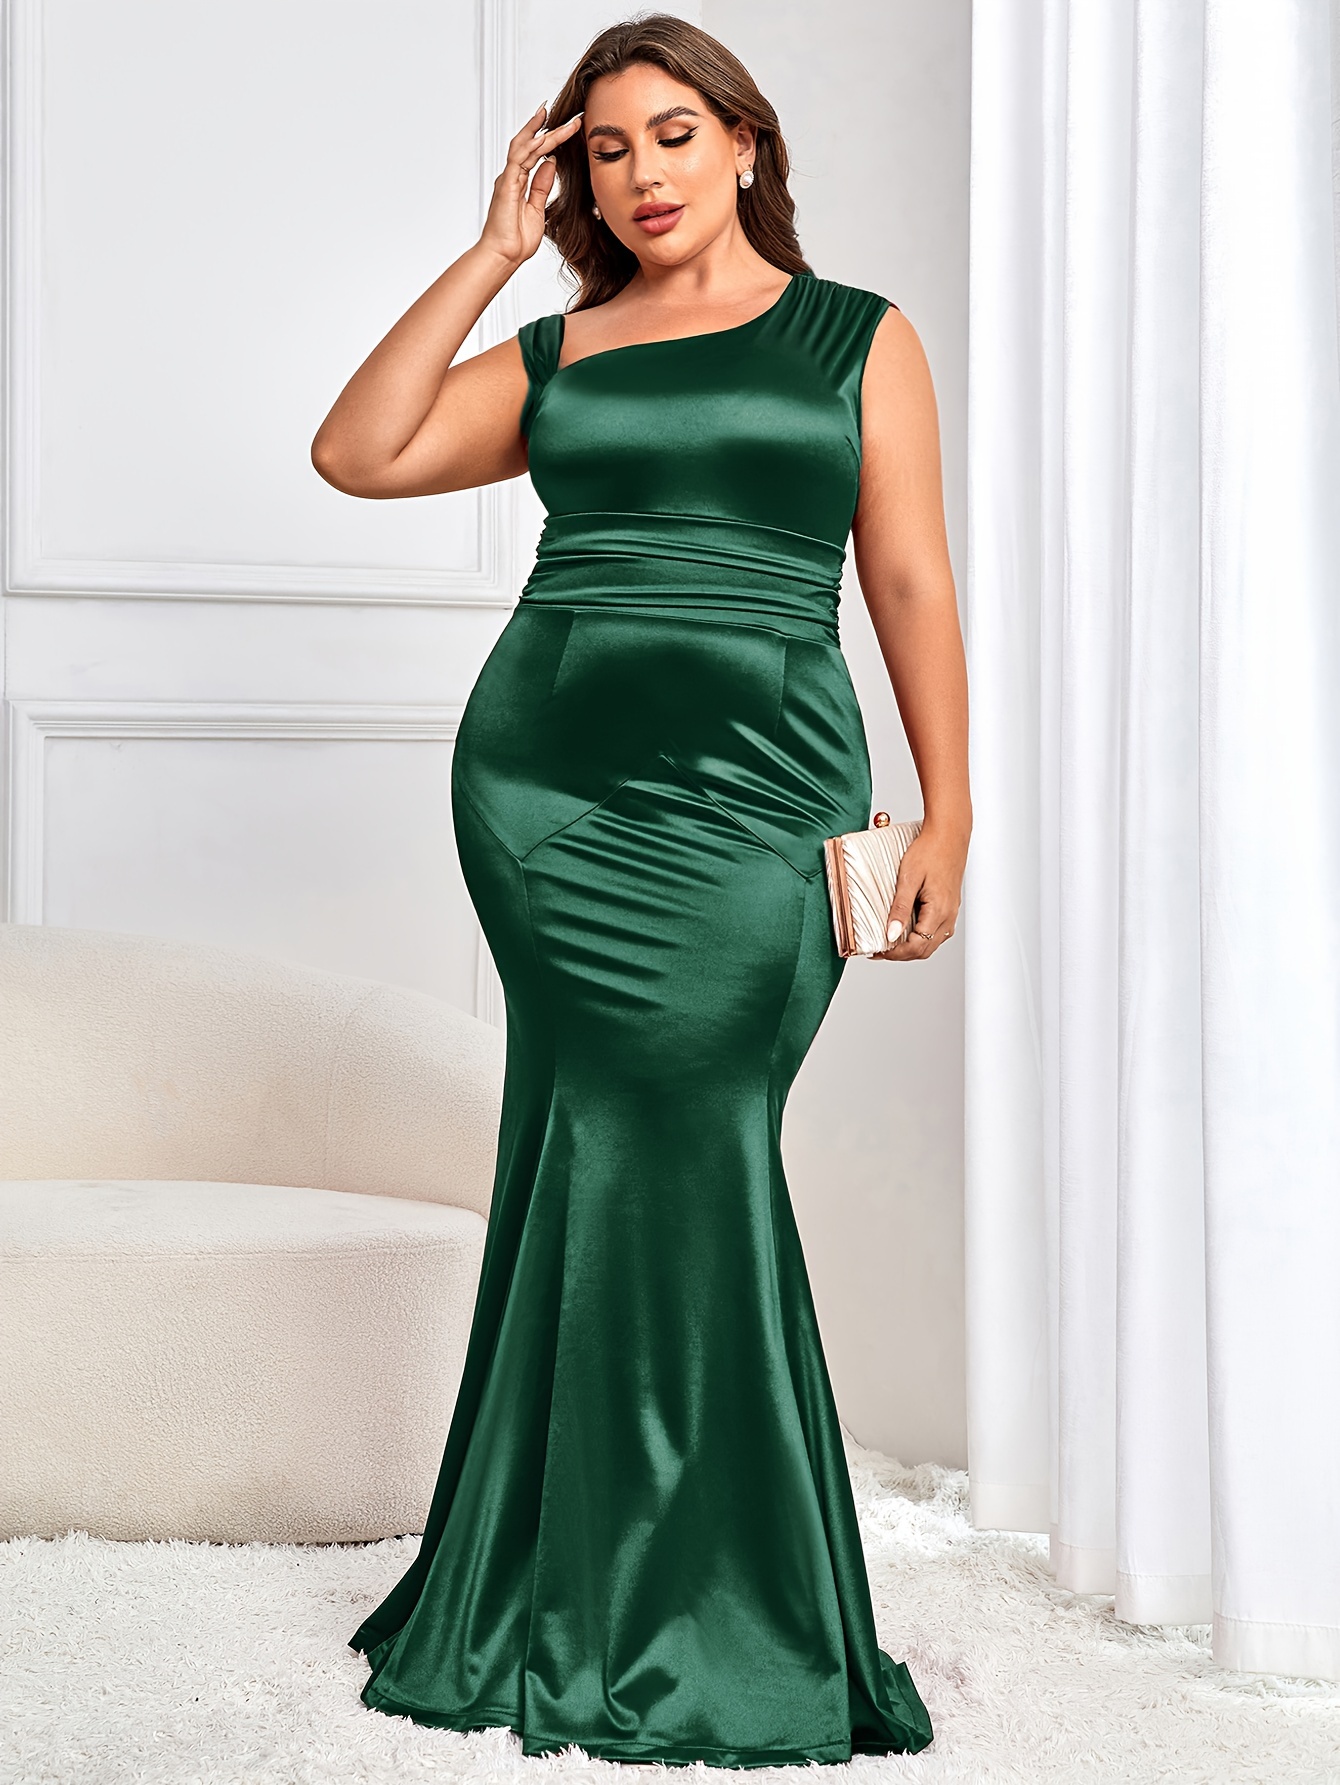 plus size asymmetrical mother of the bride dress elegant sleeveless fit flare dress for wedding party womens plus size clothing